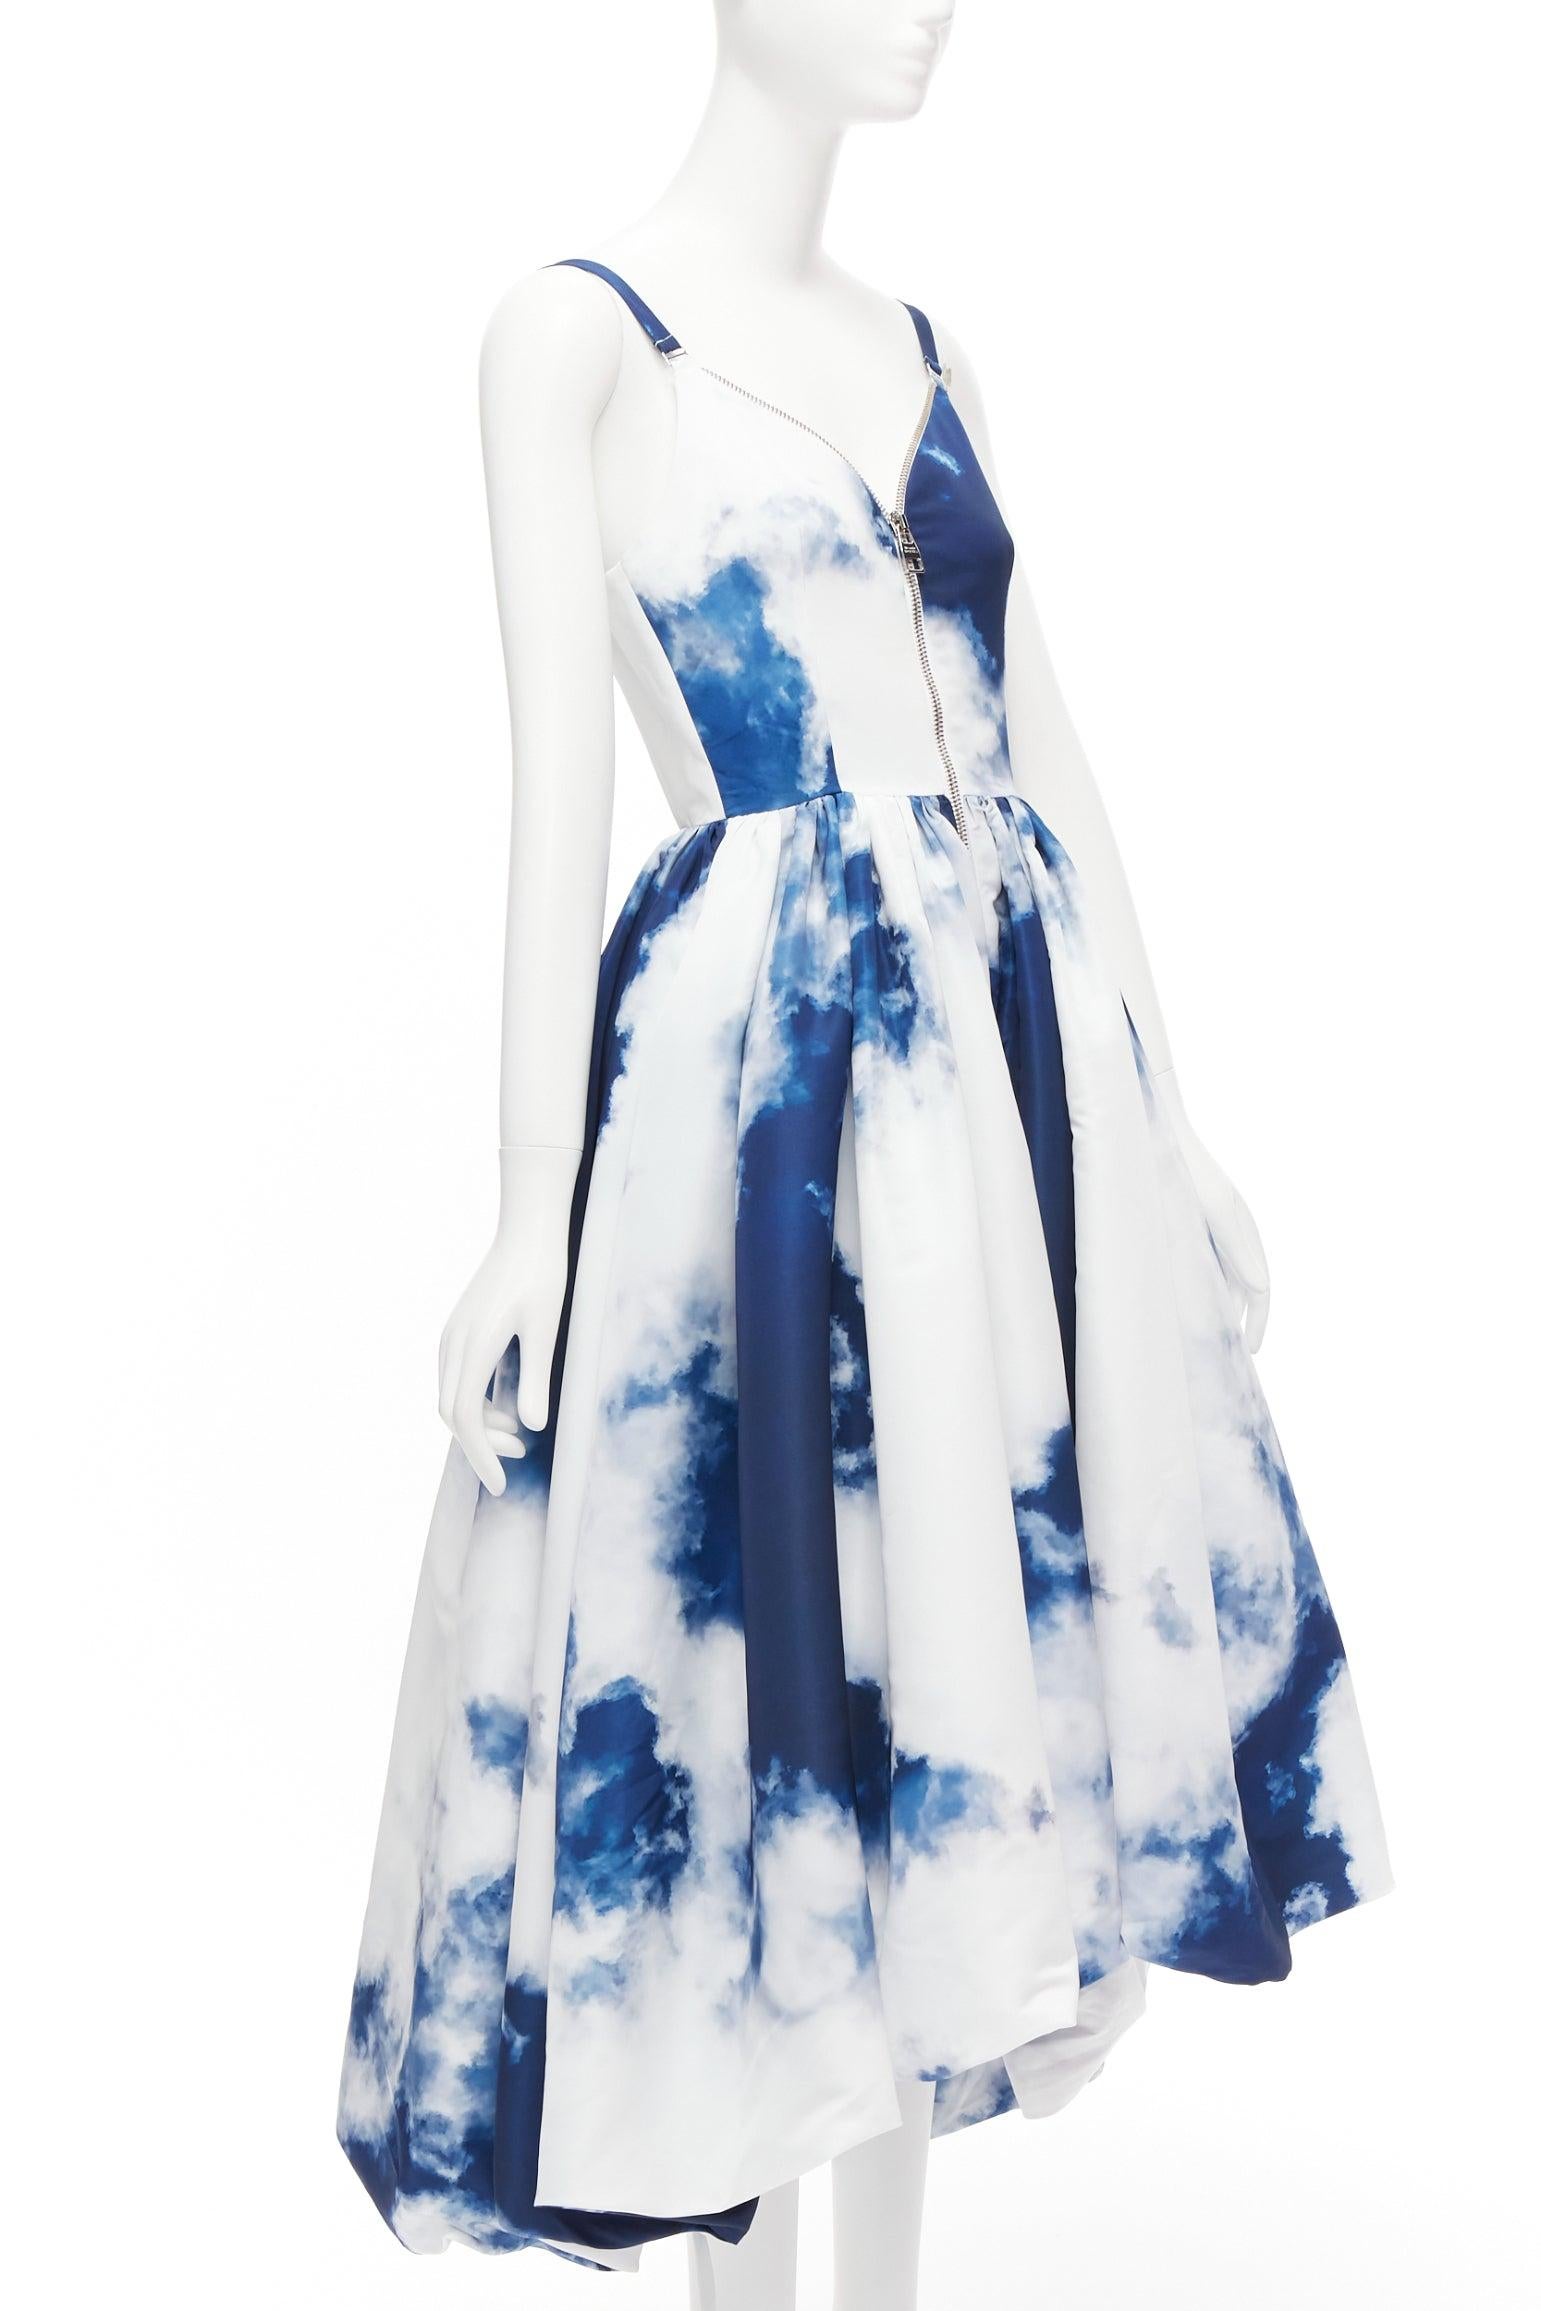 ALEXANDER MCQUEEN spring 2022 Runway blue white cloud midi dress Jisoo Blackpink
Reference: AAWC/A00688
Brand: Alexander McQueen
Collection: 2022 - Runway
As seen on: Tang Wei
Material: Polyester
Color: White, Blue
Pattern: Photographic